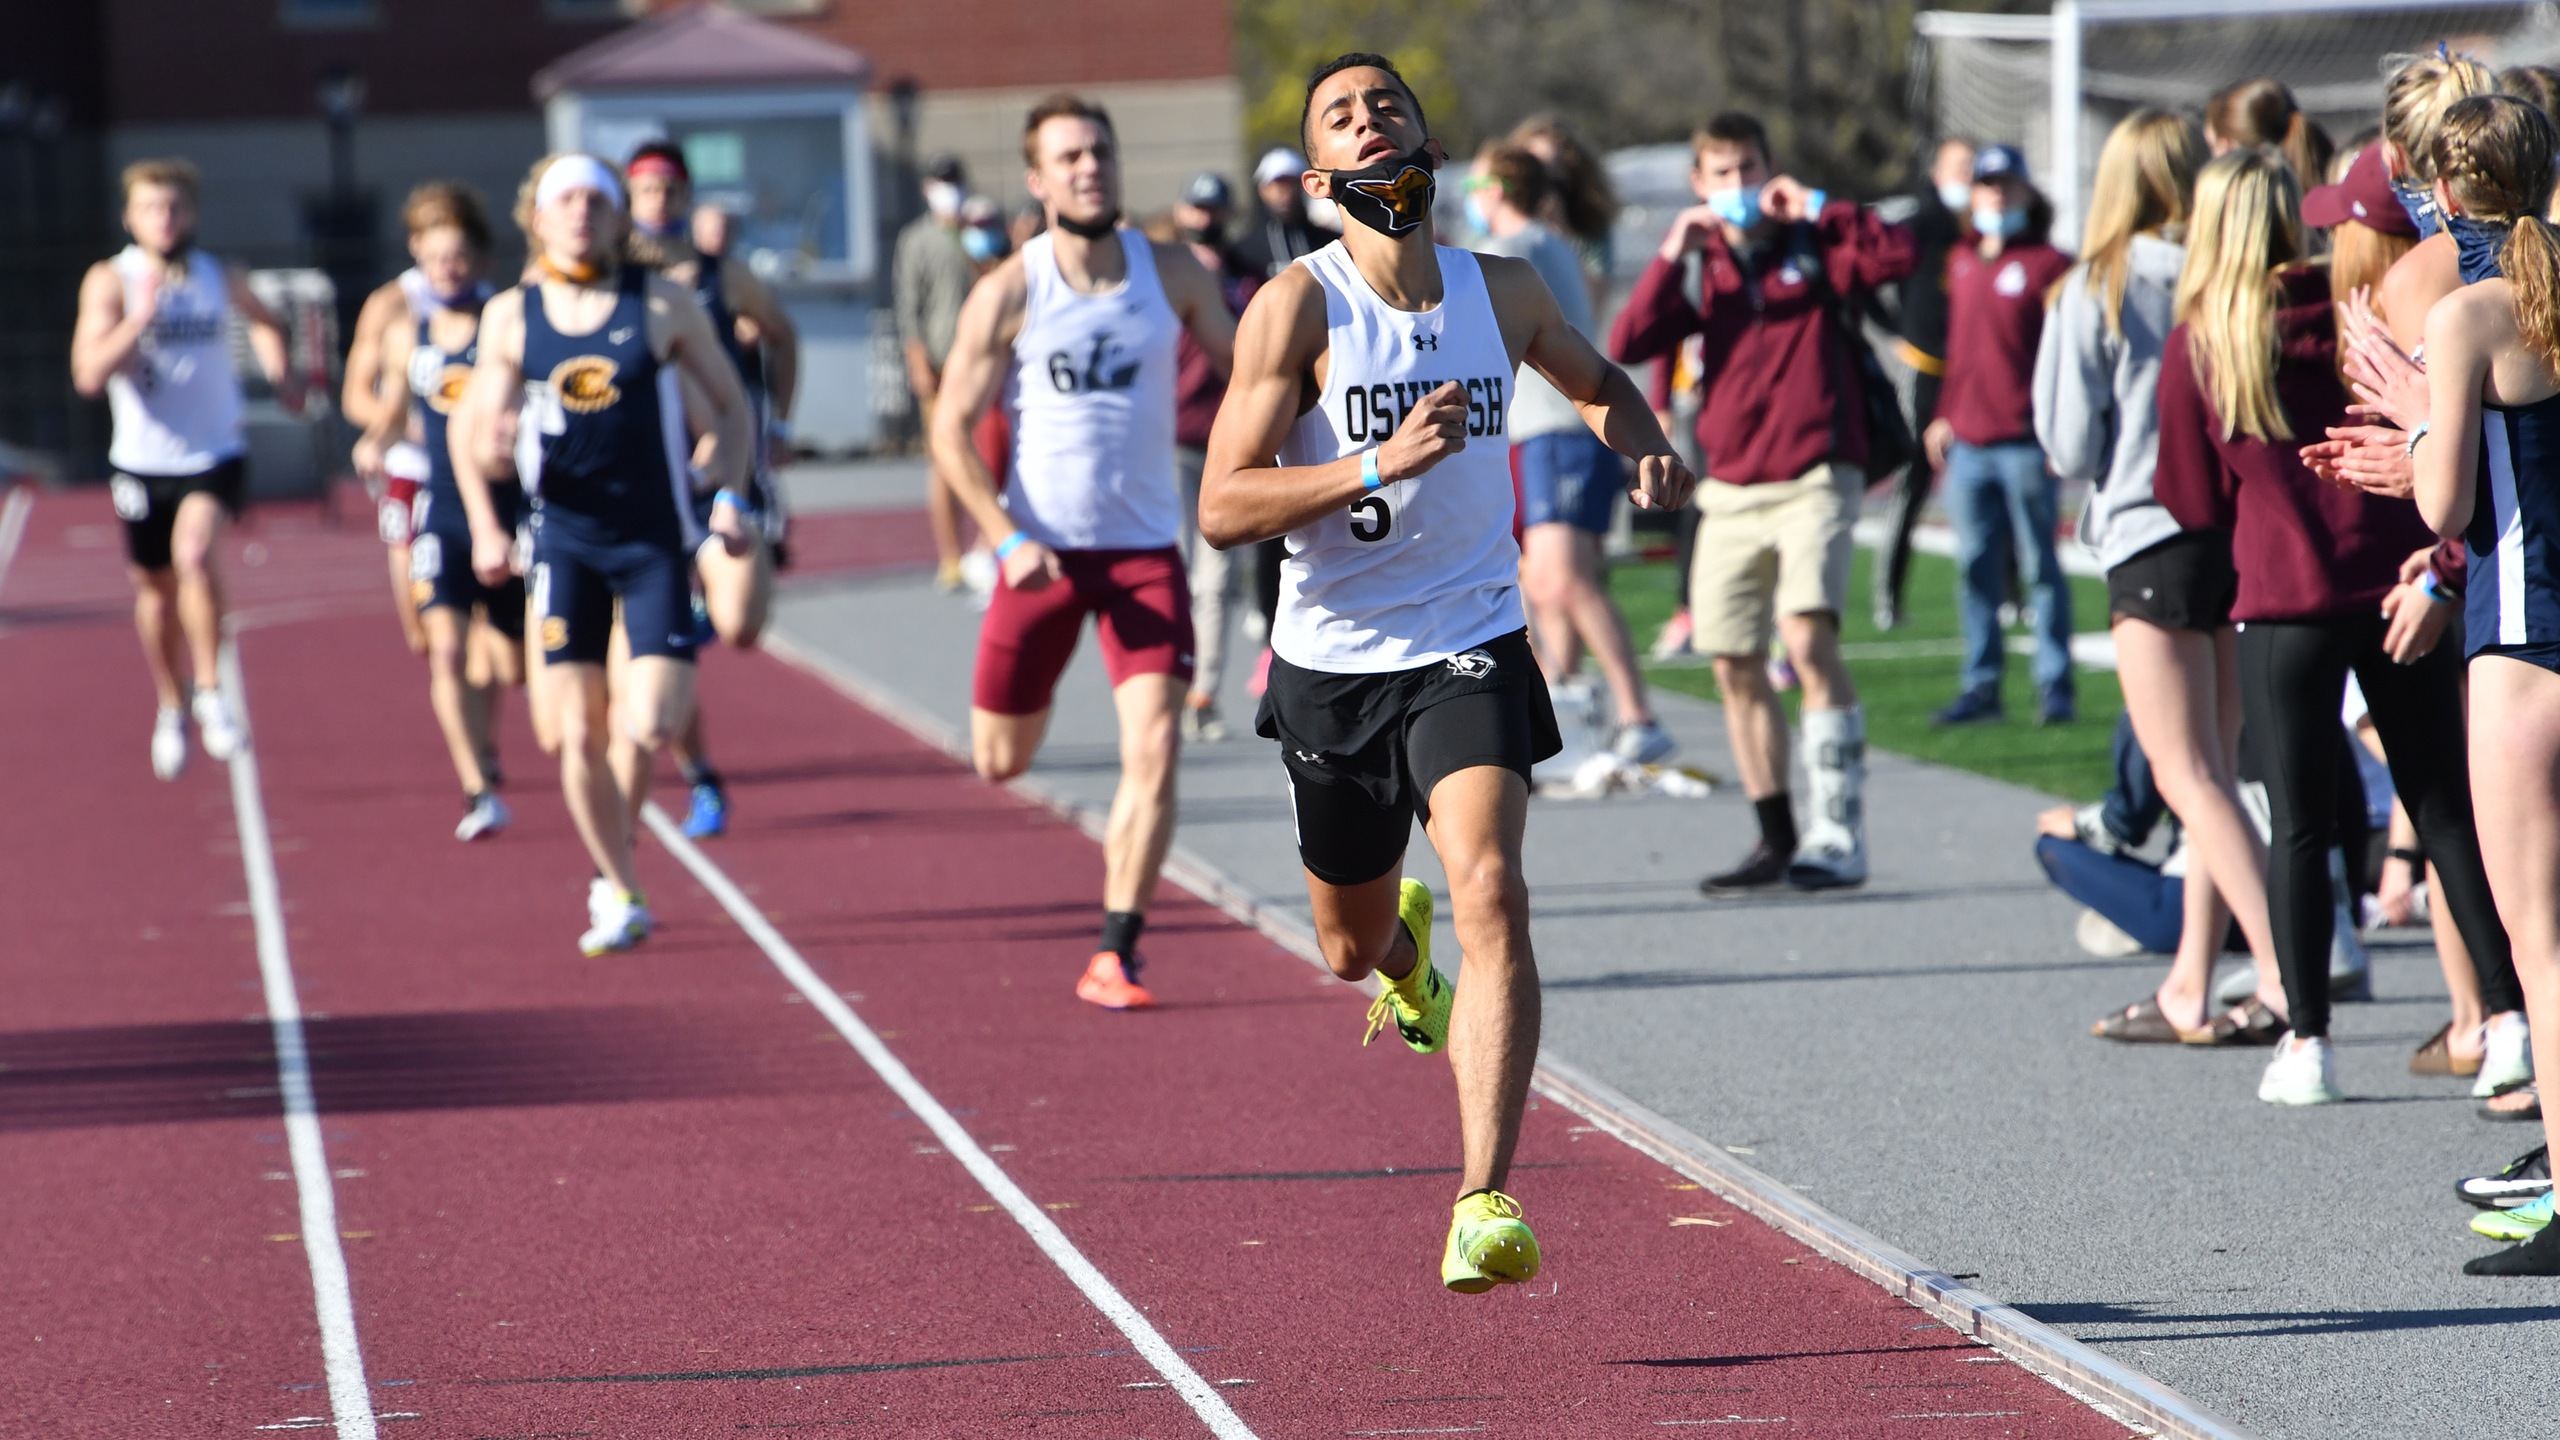 Steven Potter won the 800- and 1,500-meter runs at this year's WIAC Championship.